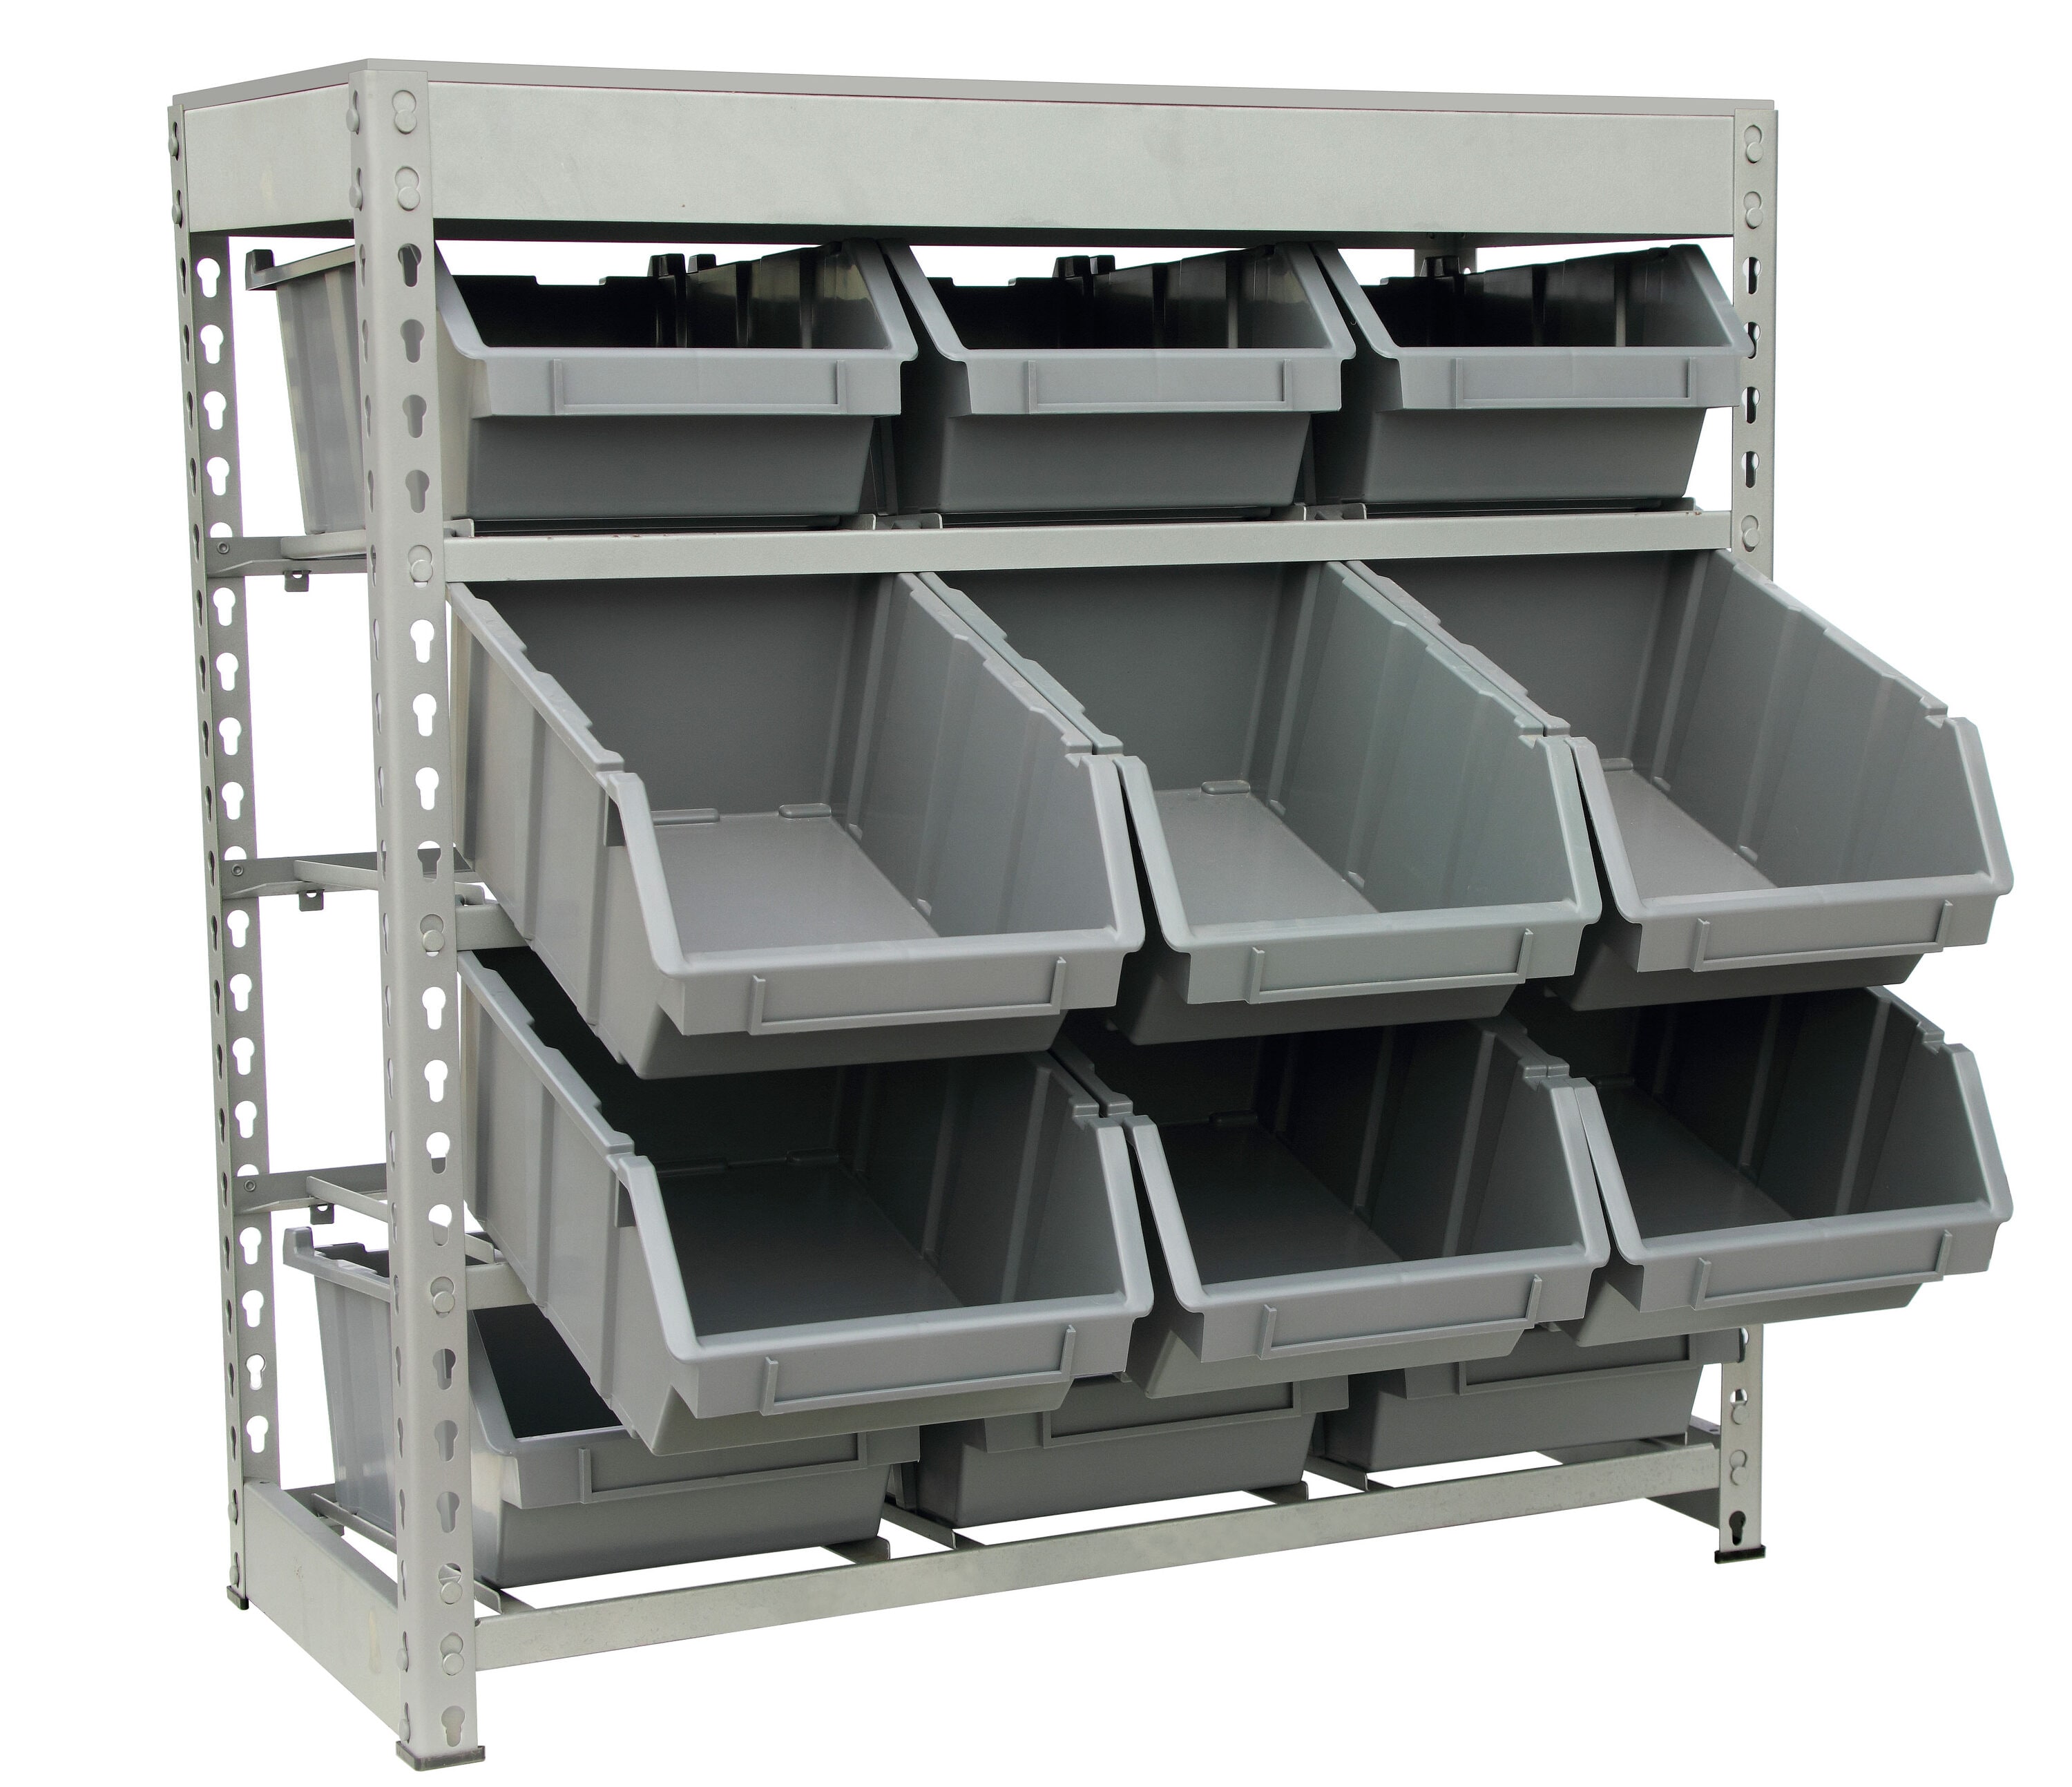 919829051660, bin 35 stand, In all 28 bins in single sided stand, 54 bins  in double sided stand 